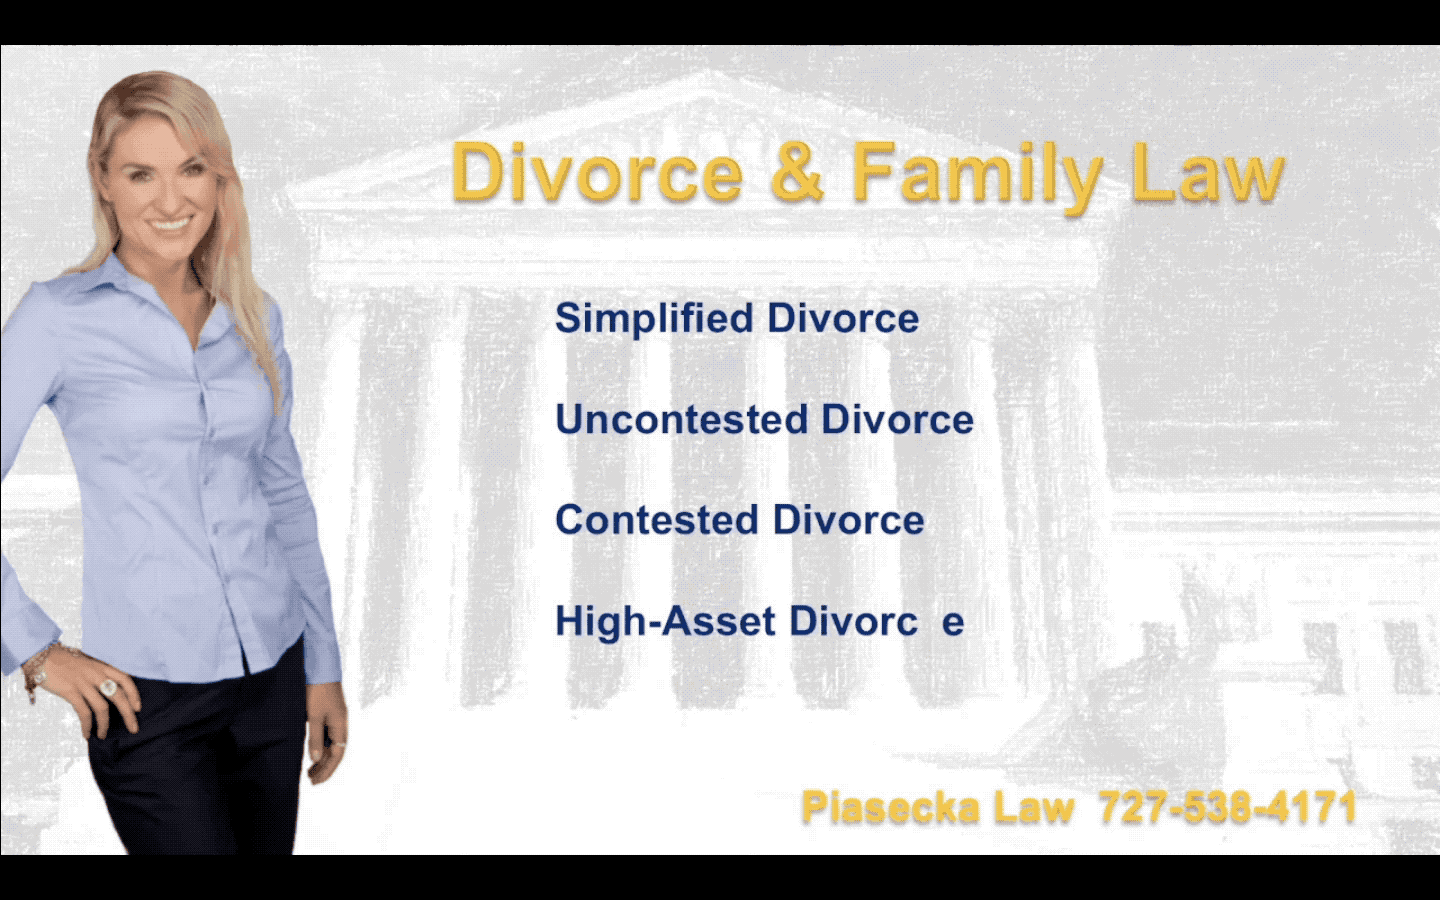 Piasecka Law 727-538-4171 Divorce & Family Law